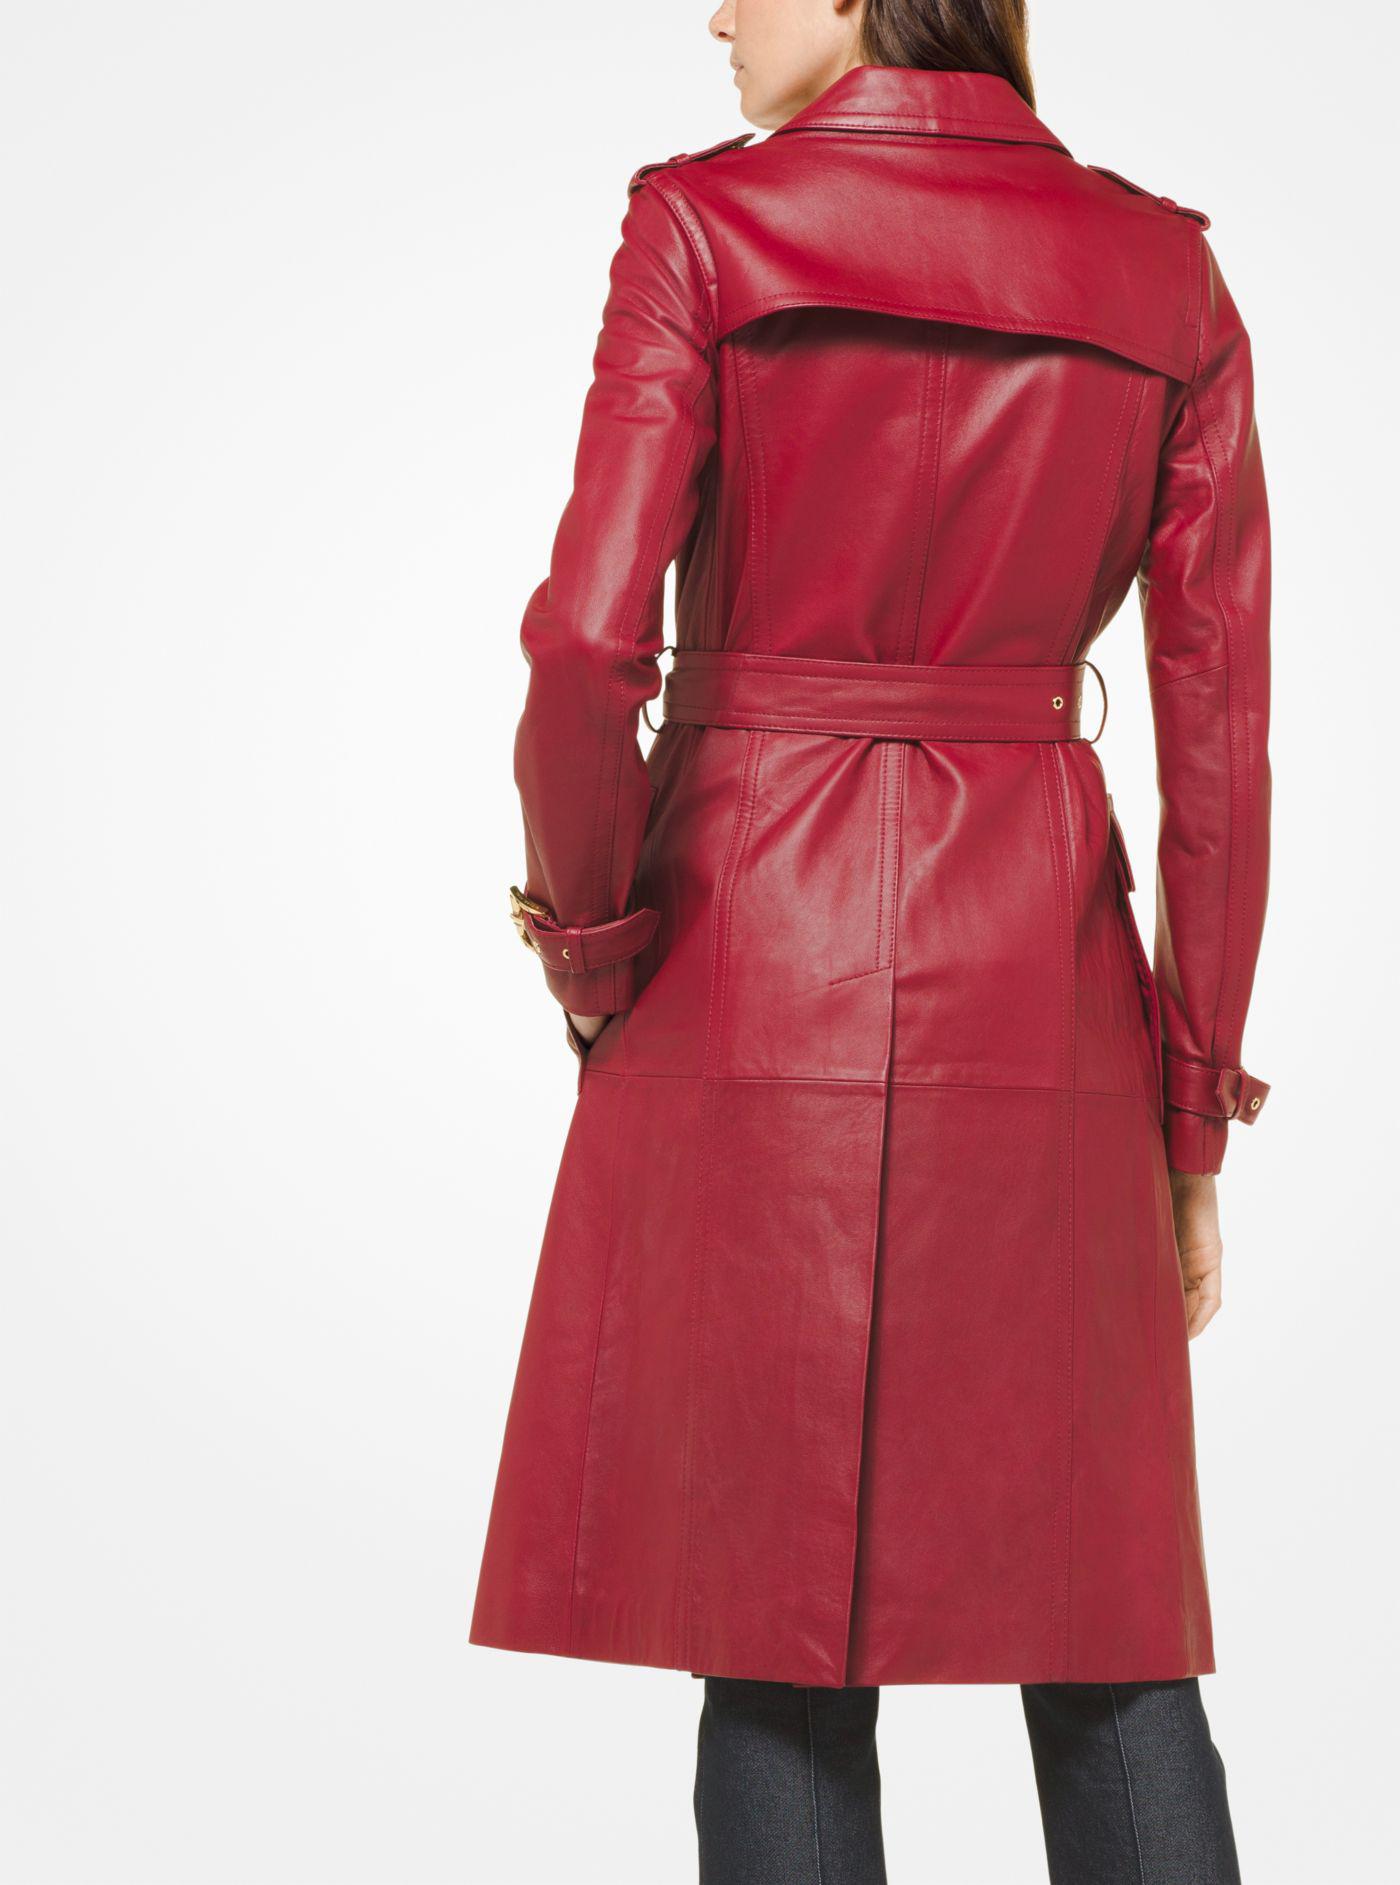 Michael Kors Leather Trench Coat in Red 